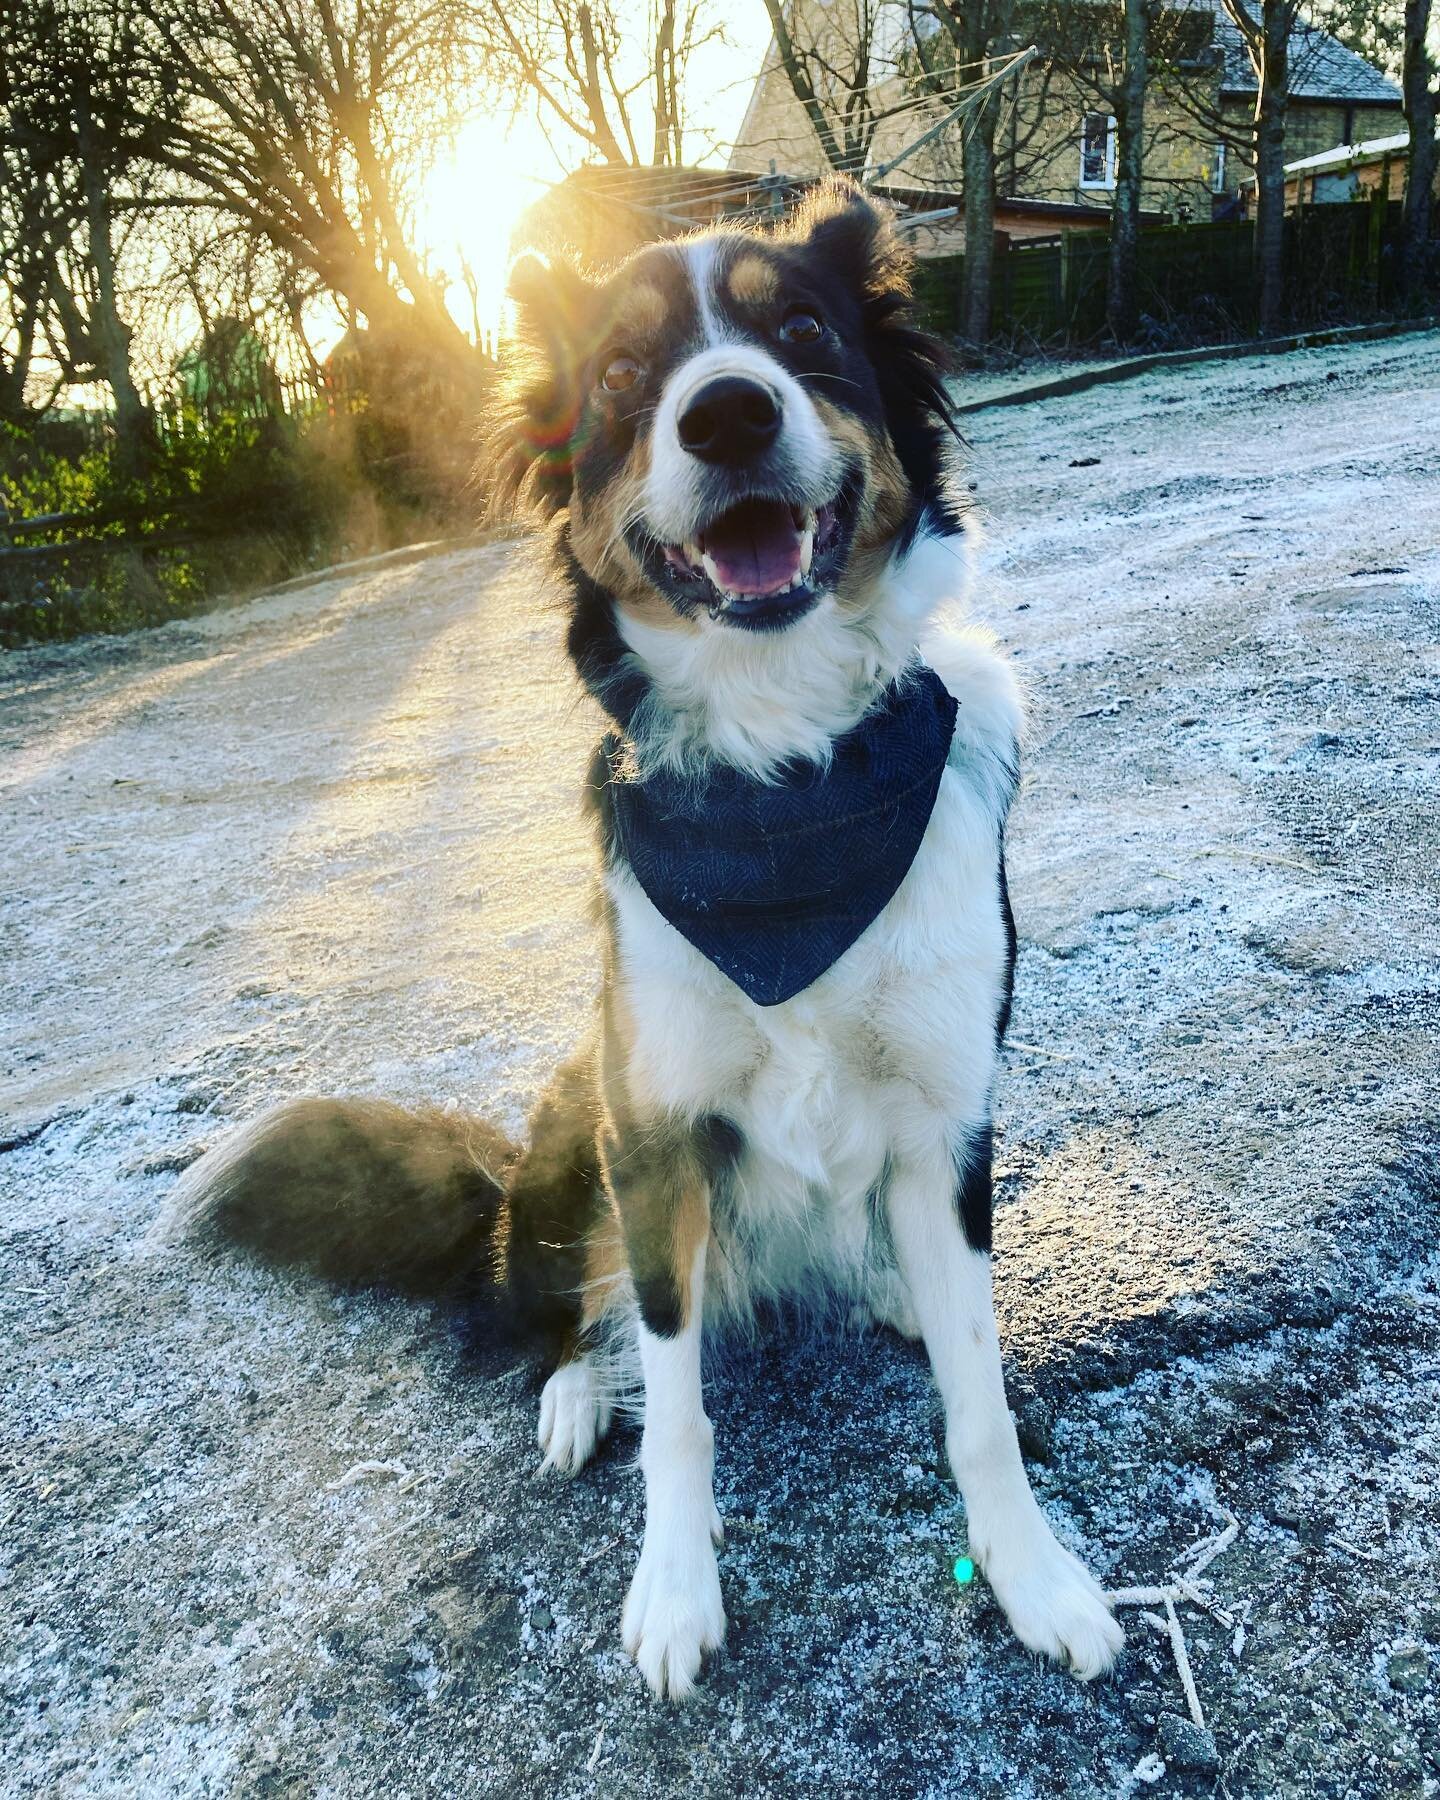 A frosty and cold morning on the Farm today. Lucky someone has a lot of thick fur! #farm #farmlifeisthebest #farming #bordercollie #sheepdog #workingdog #bordercollies #borderdercollielife #bordercolliesofinstagram #pigfarm #coldweather #frost #sunri